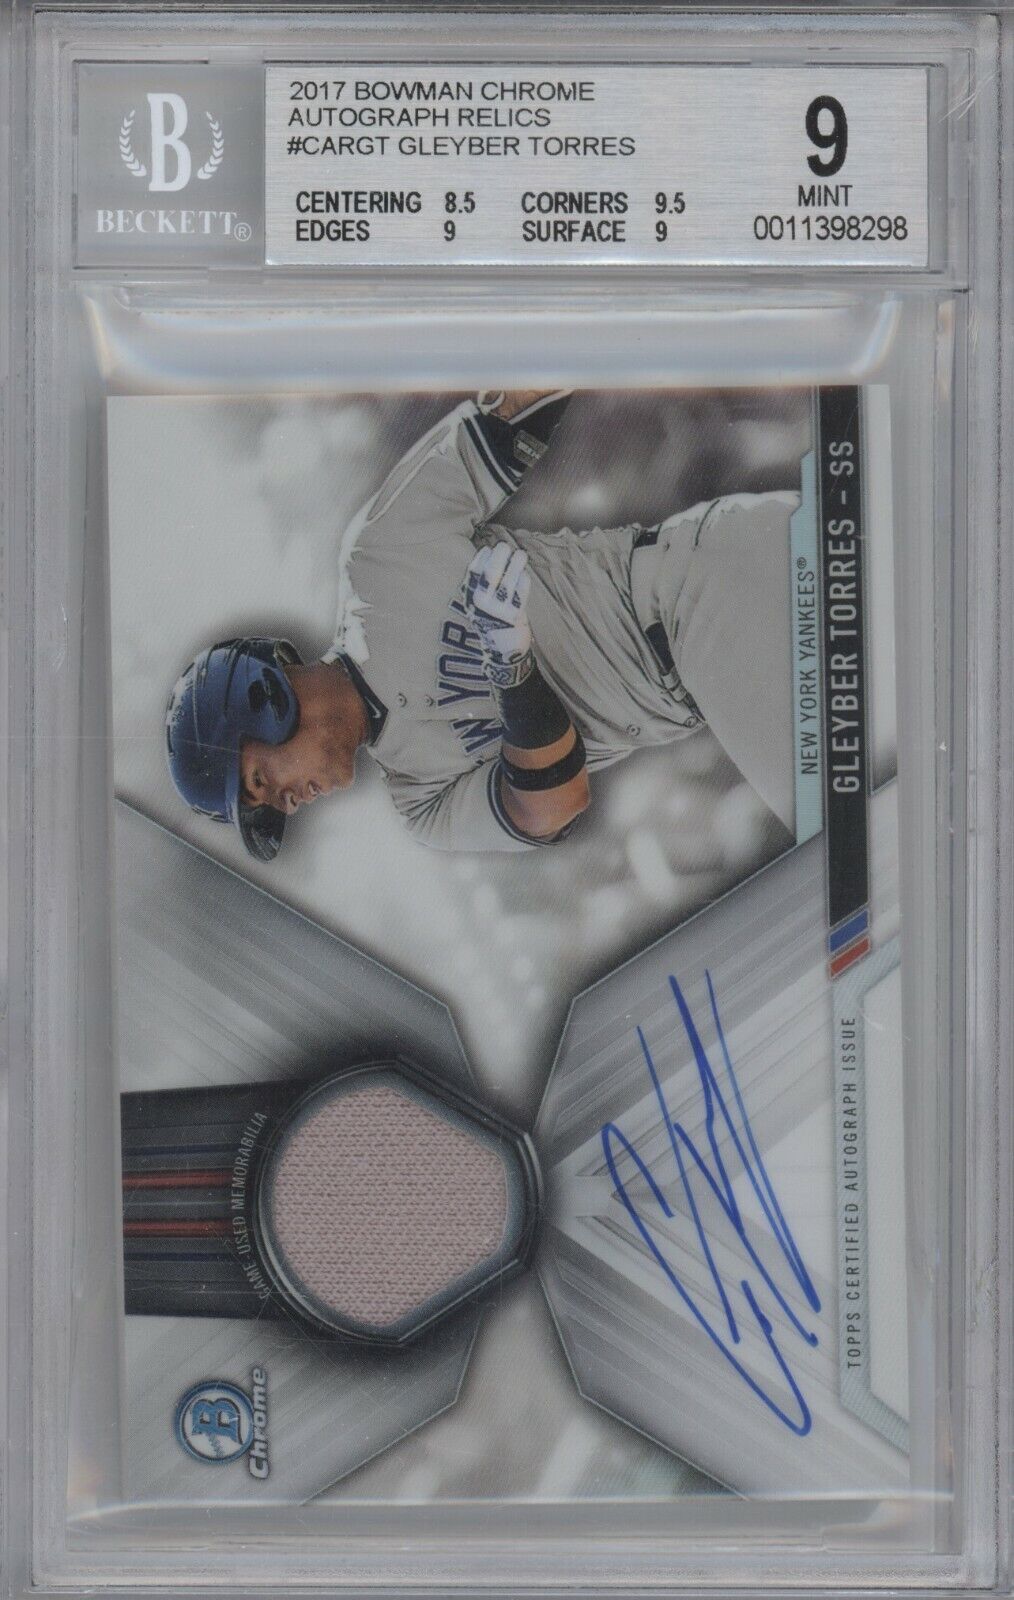 GLEYBER TORRES 2017 BOWMAN CHROME RELIC AUTO #CARGT /150 BGS 9 10 YANKEES